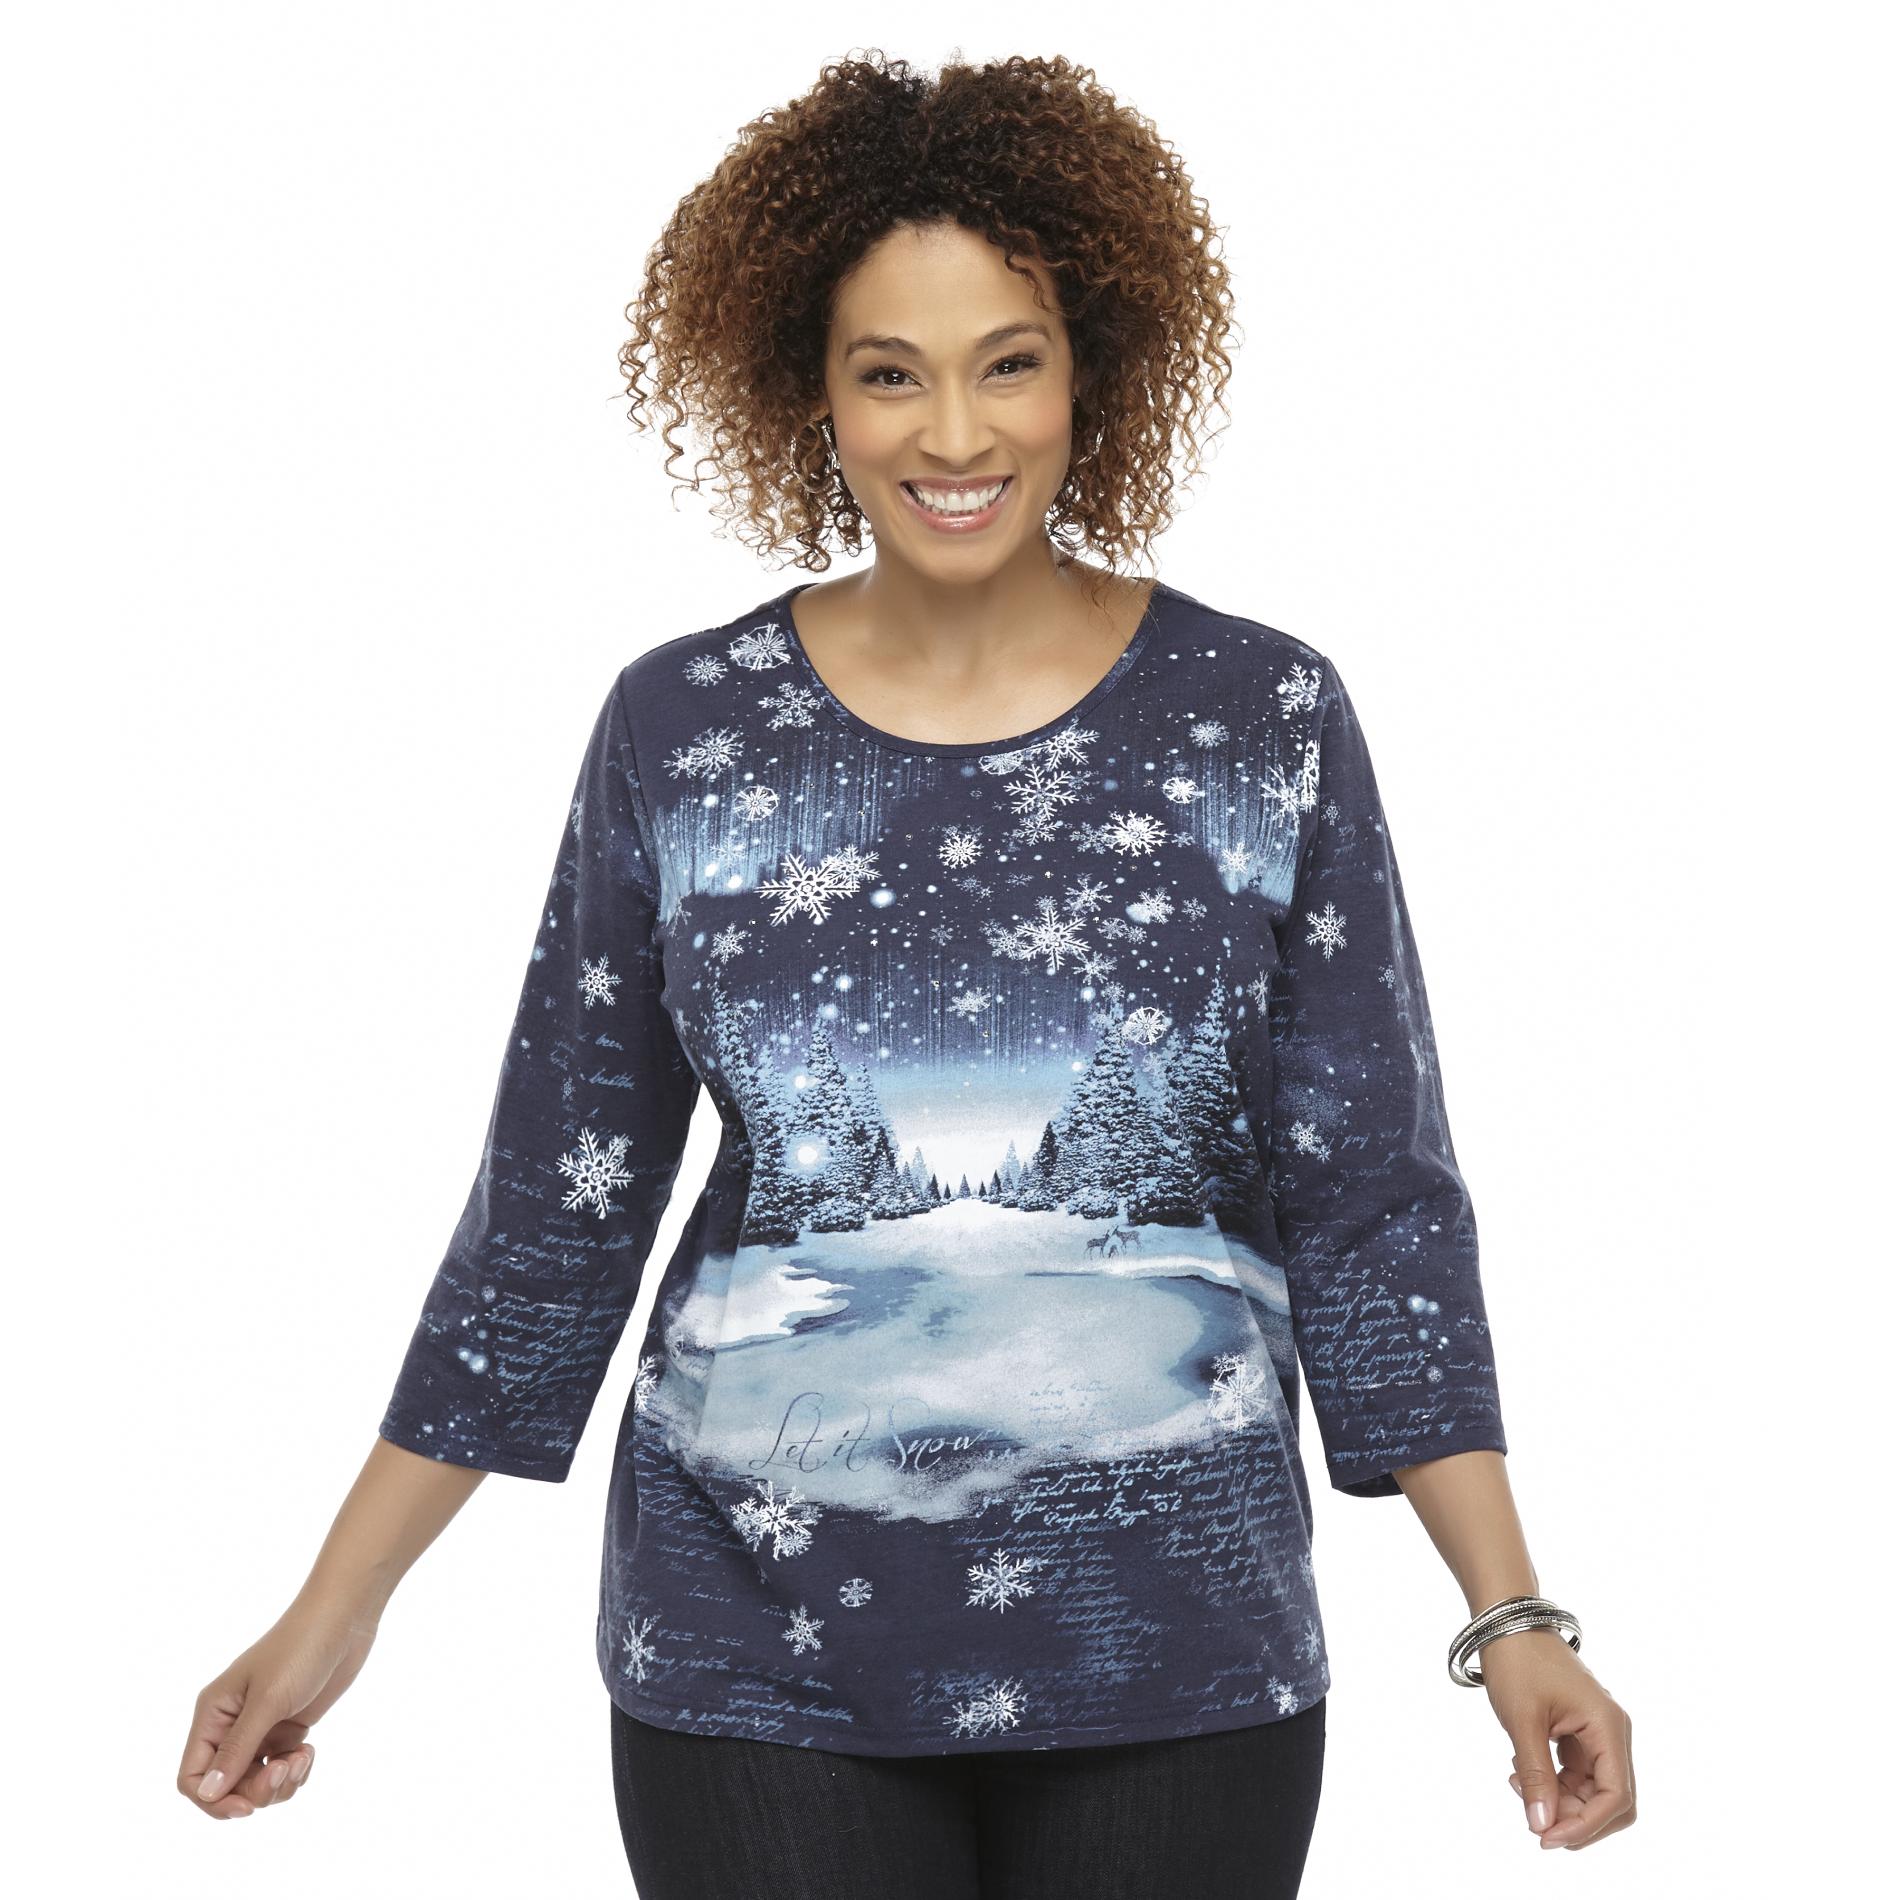 Holiday Editions Women's Plus Graphic Shirt - Let It Snow